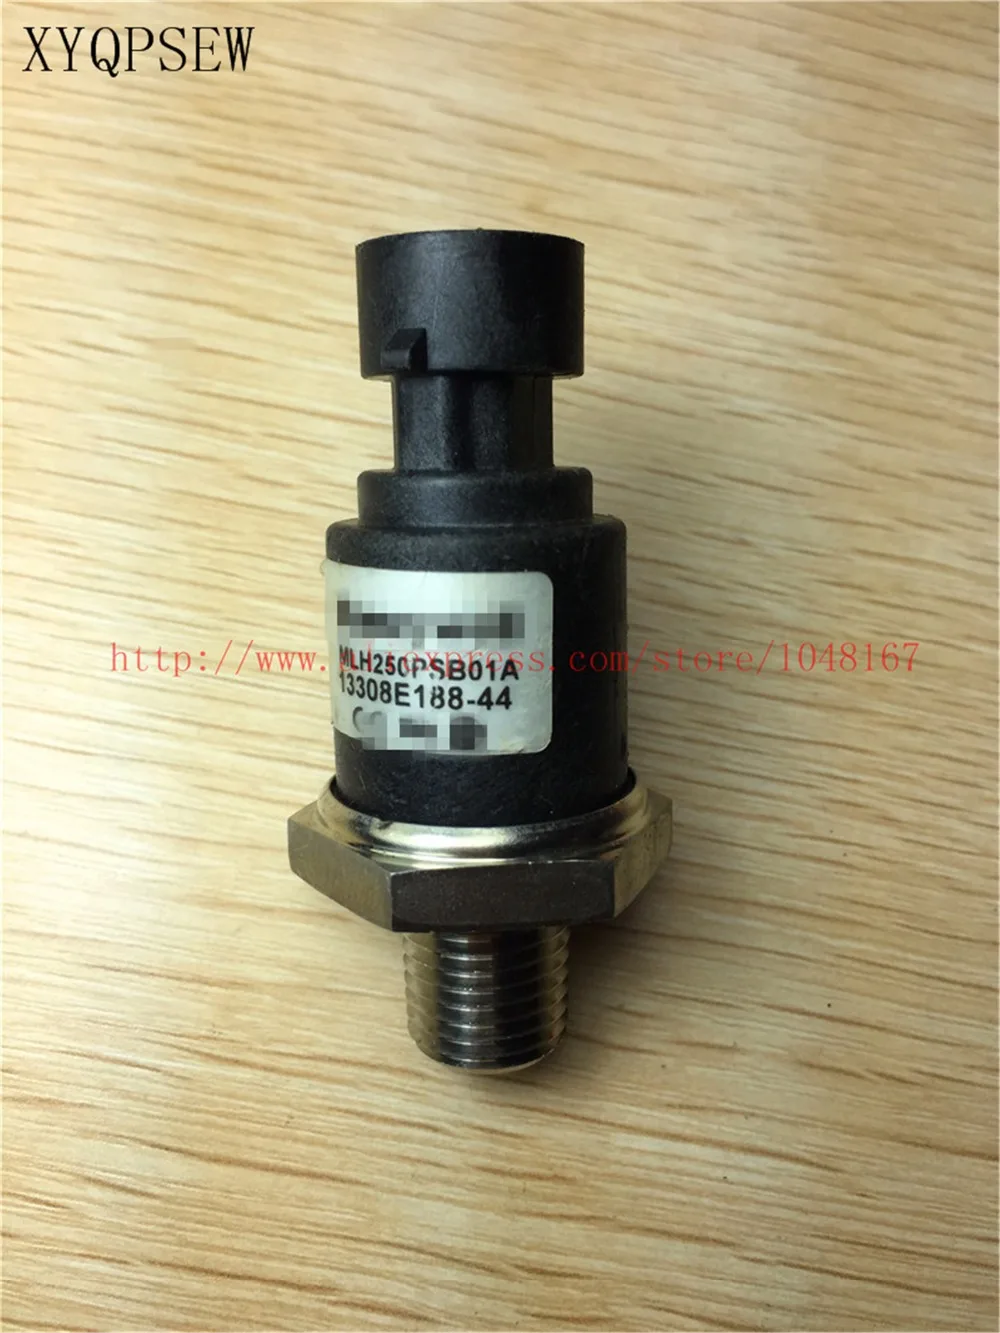 

XYQPSEW For Honeywell industrial pressure sensor, RoHS limit switch,MLH250PSB01A,13308E188-44